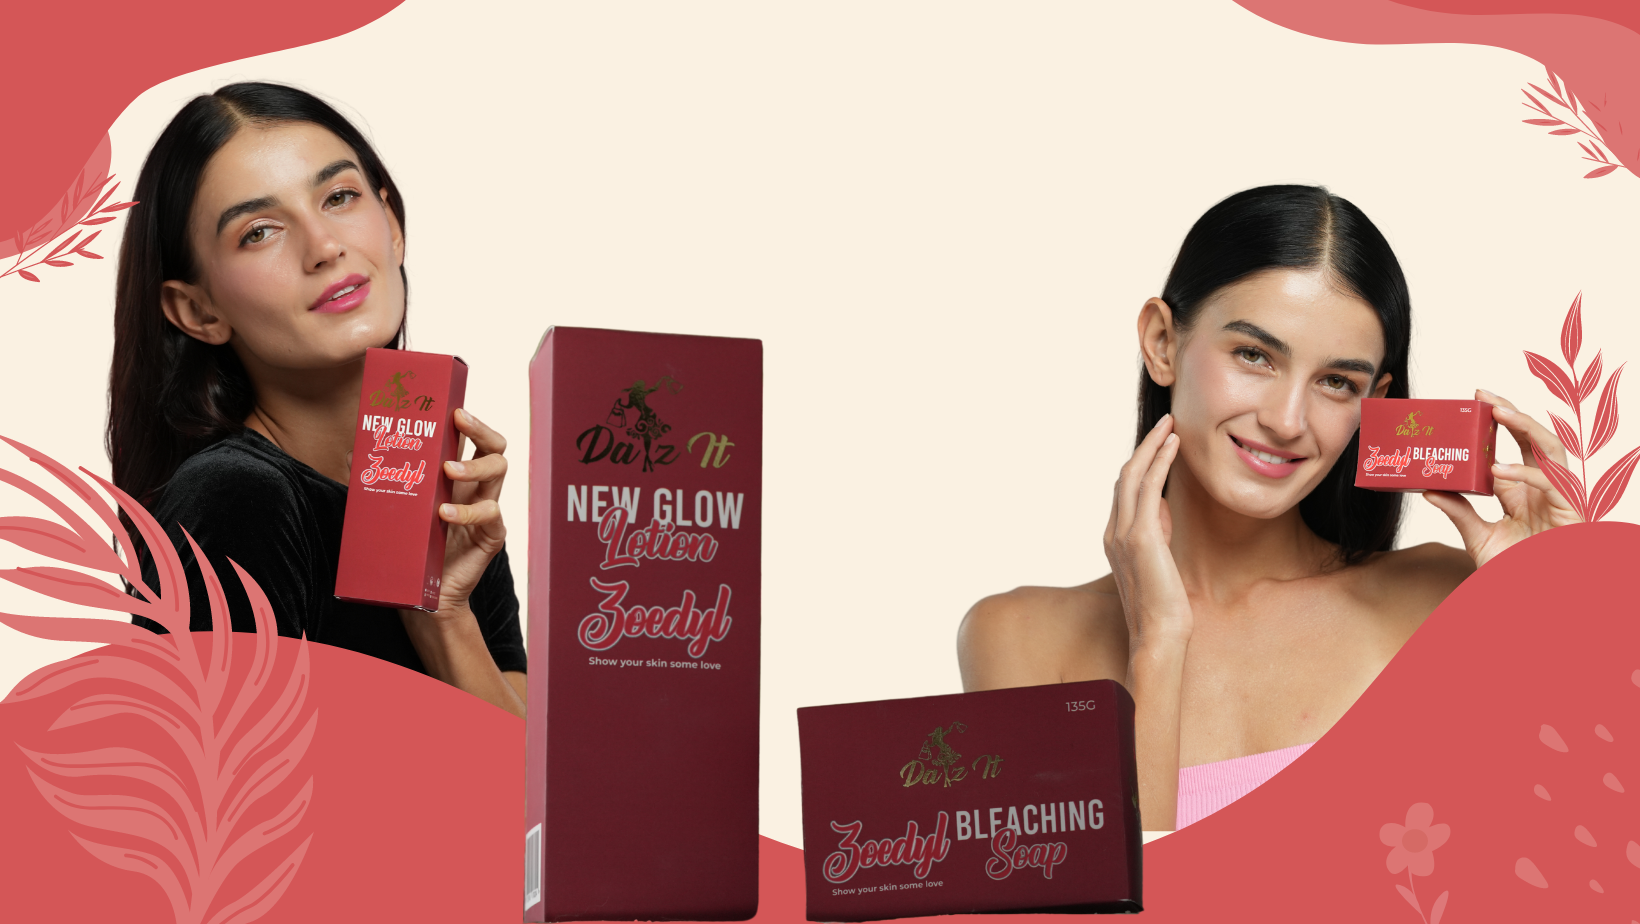 a women advertising Skin glow and soap for brighting skin